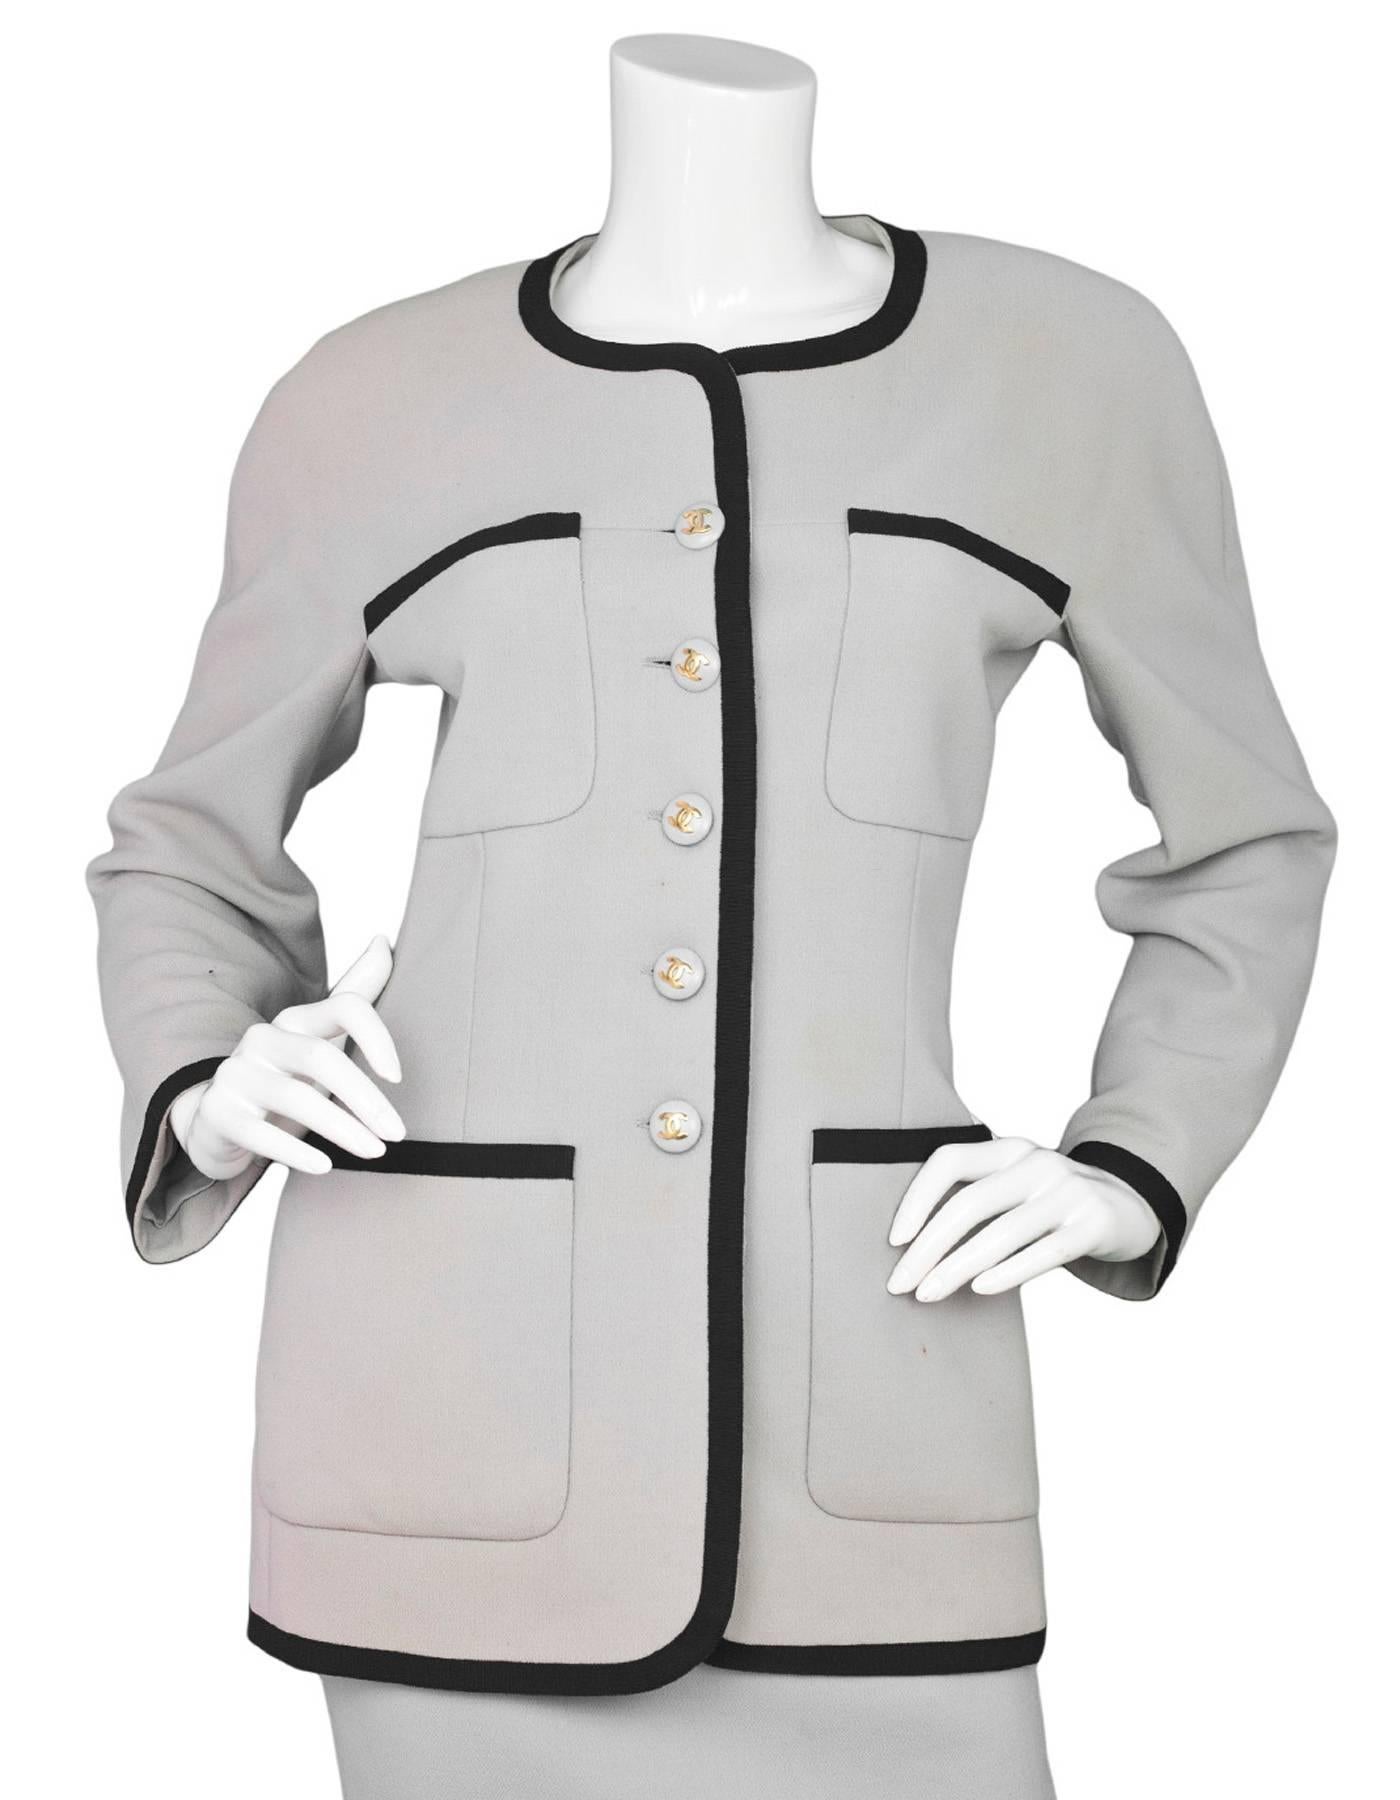 Chanel Grey & Black Wool Jacket 
Features black grosgrain trim and grey and goldtone CC detailed buttons

Made In: France
Color: Grey and black
Composition: 100% wool
Lining: Grey, 100% silk
Closure/Opening: Button down front
Exterior Pockets: Four